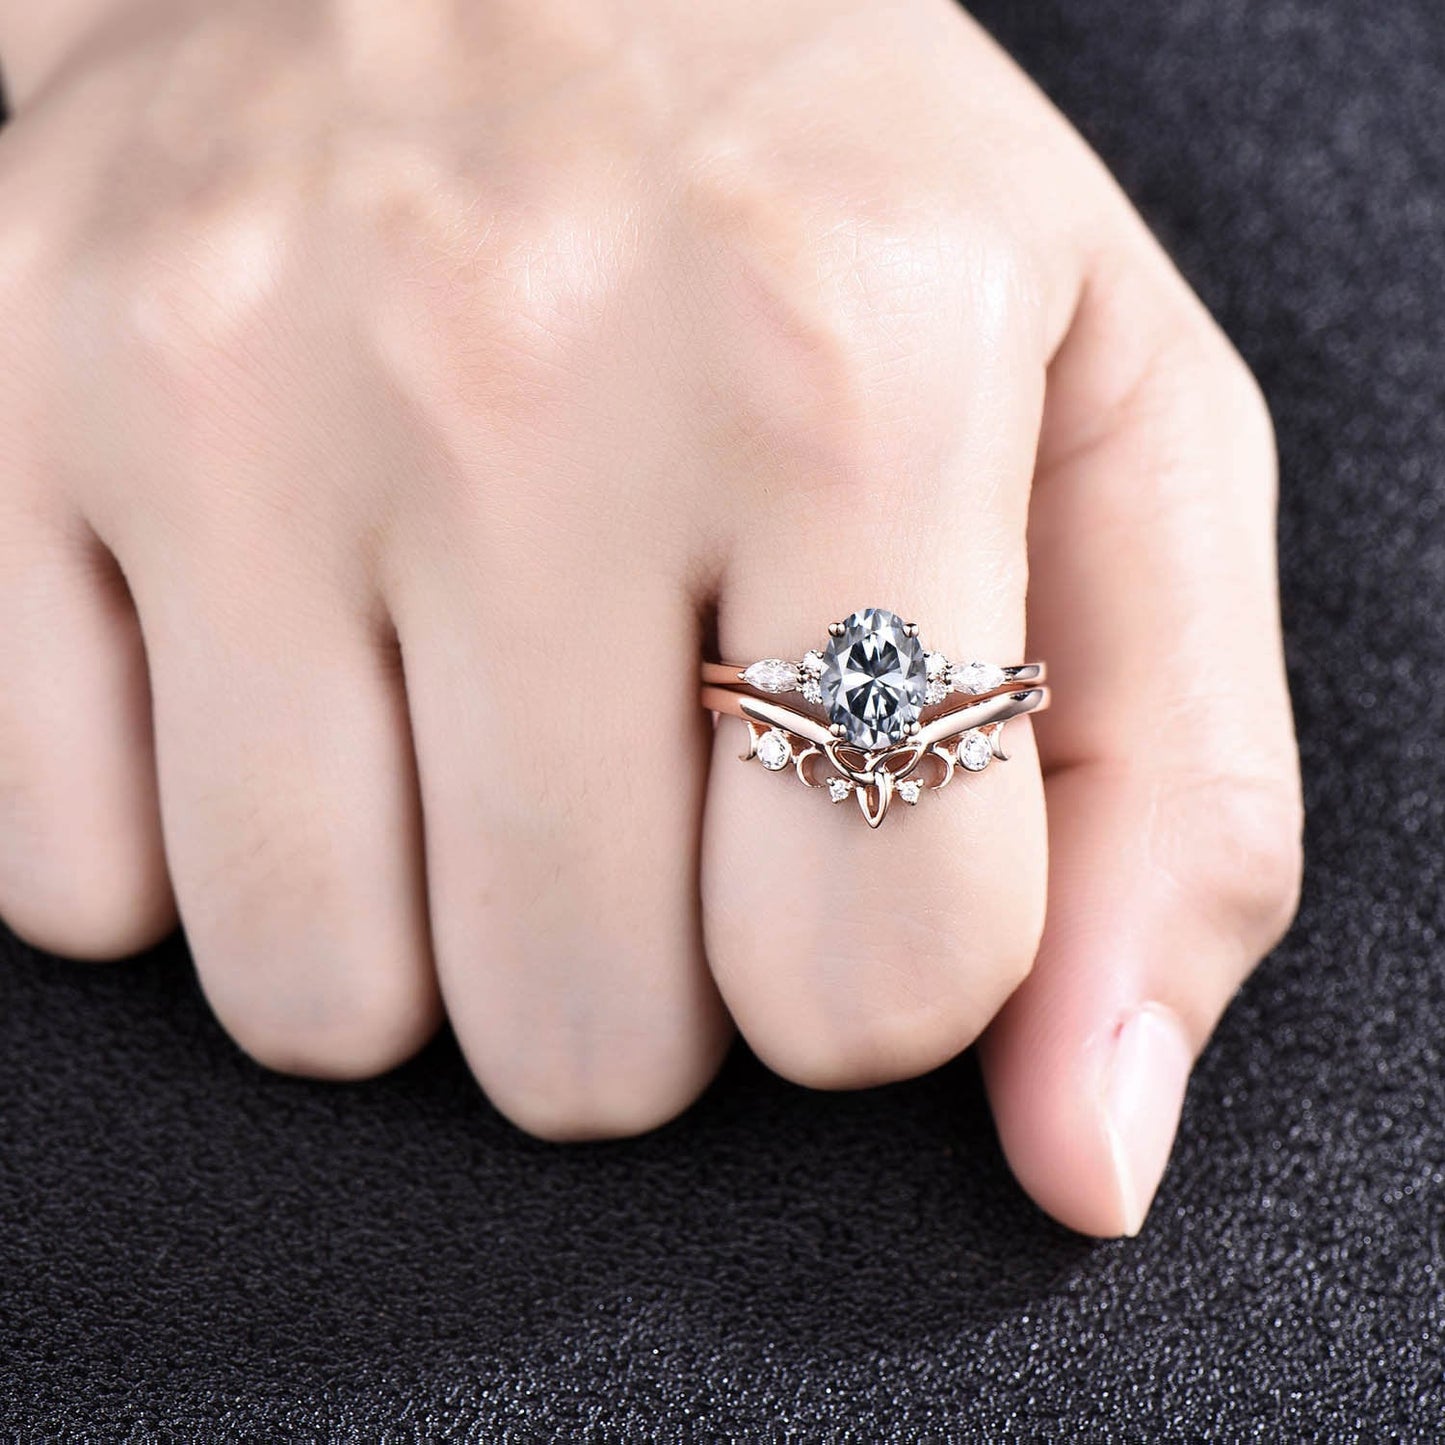 Unique oval cut gray moissanite engagement ring set rose gold vintage cluster marquise cut diamond promise wedding ring set for women gift